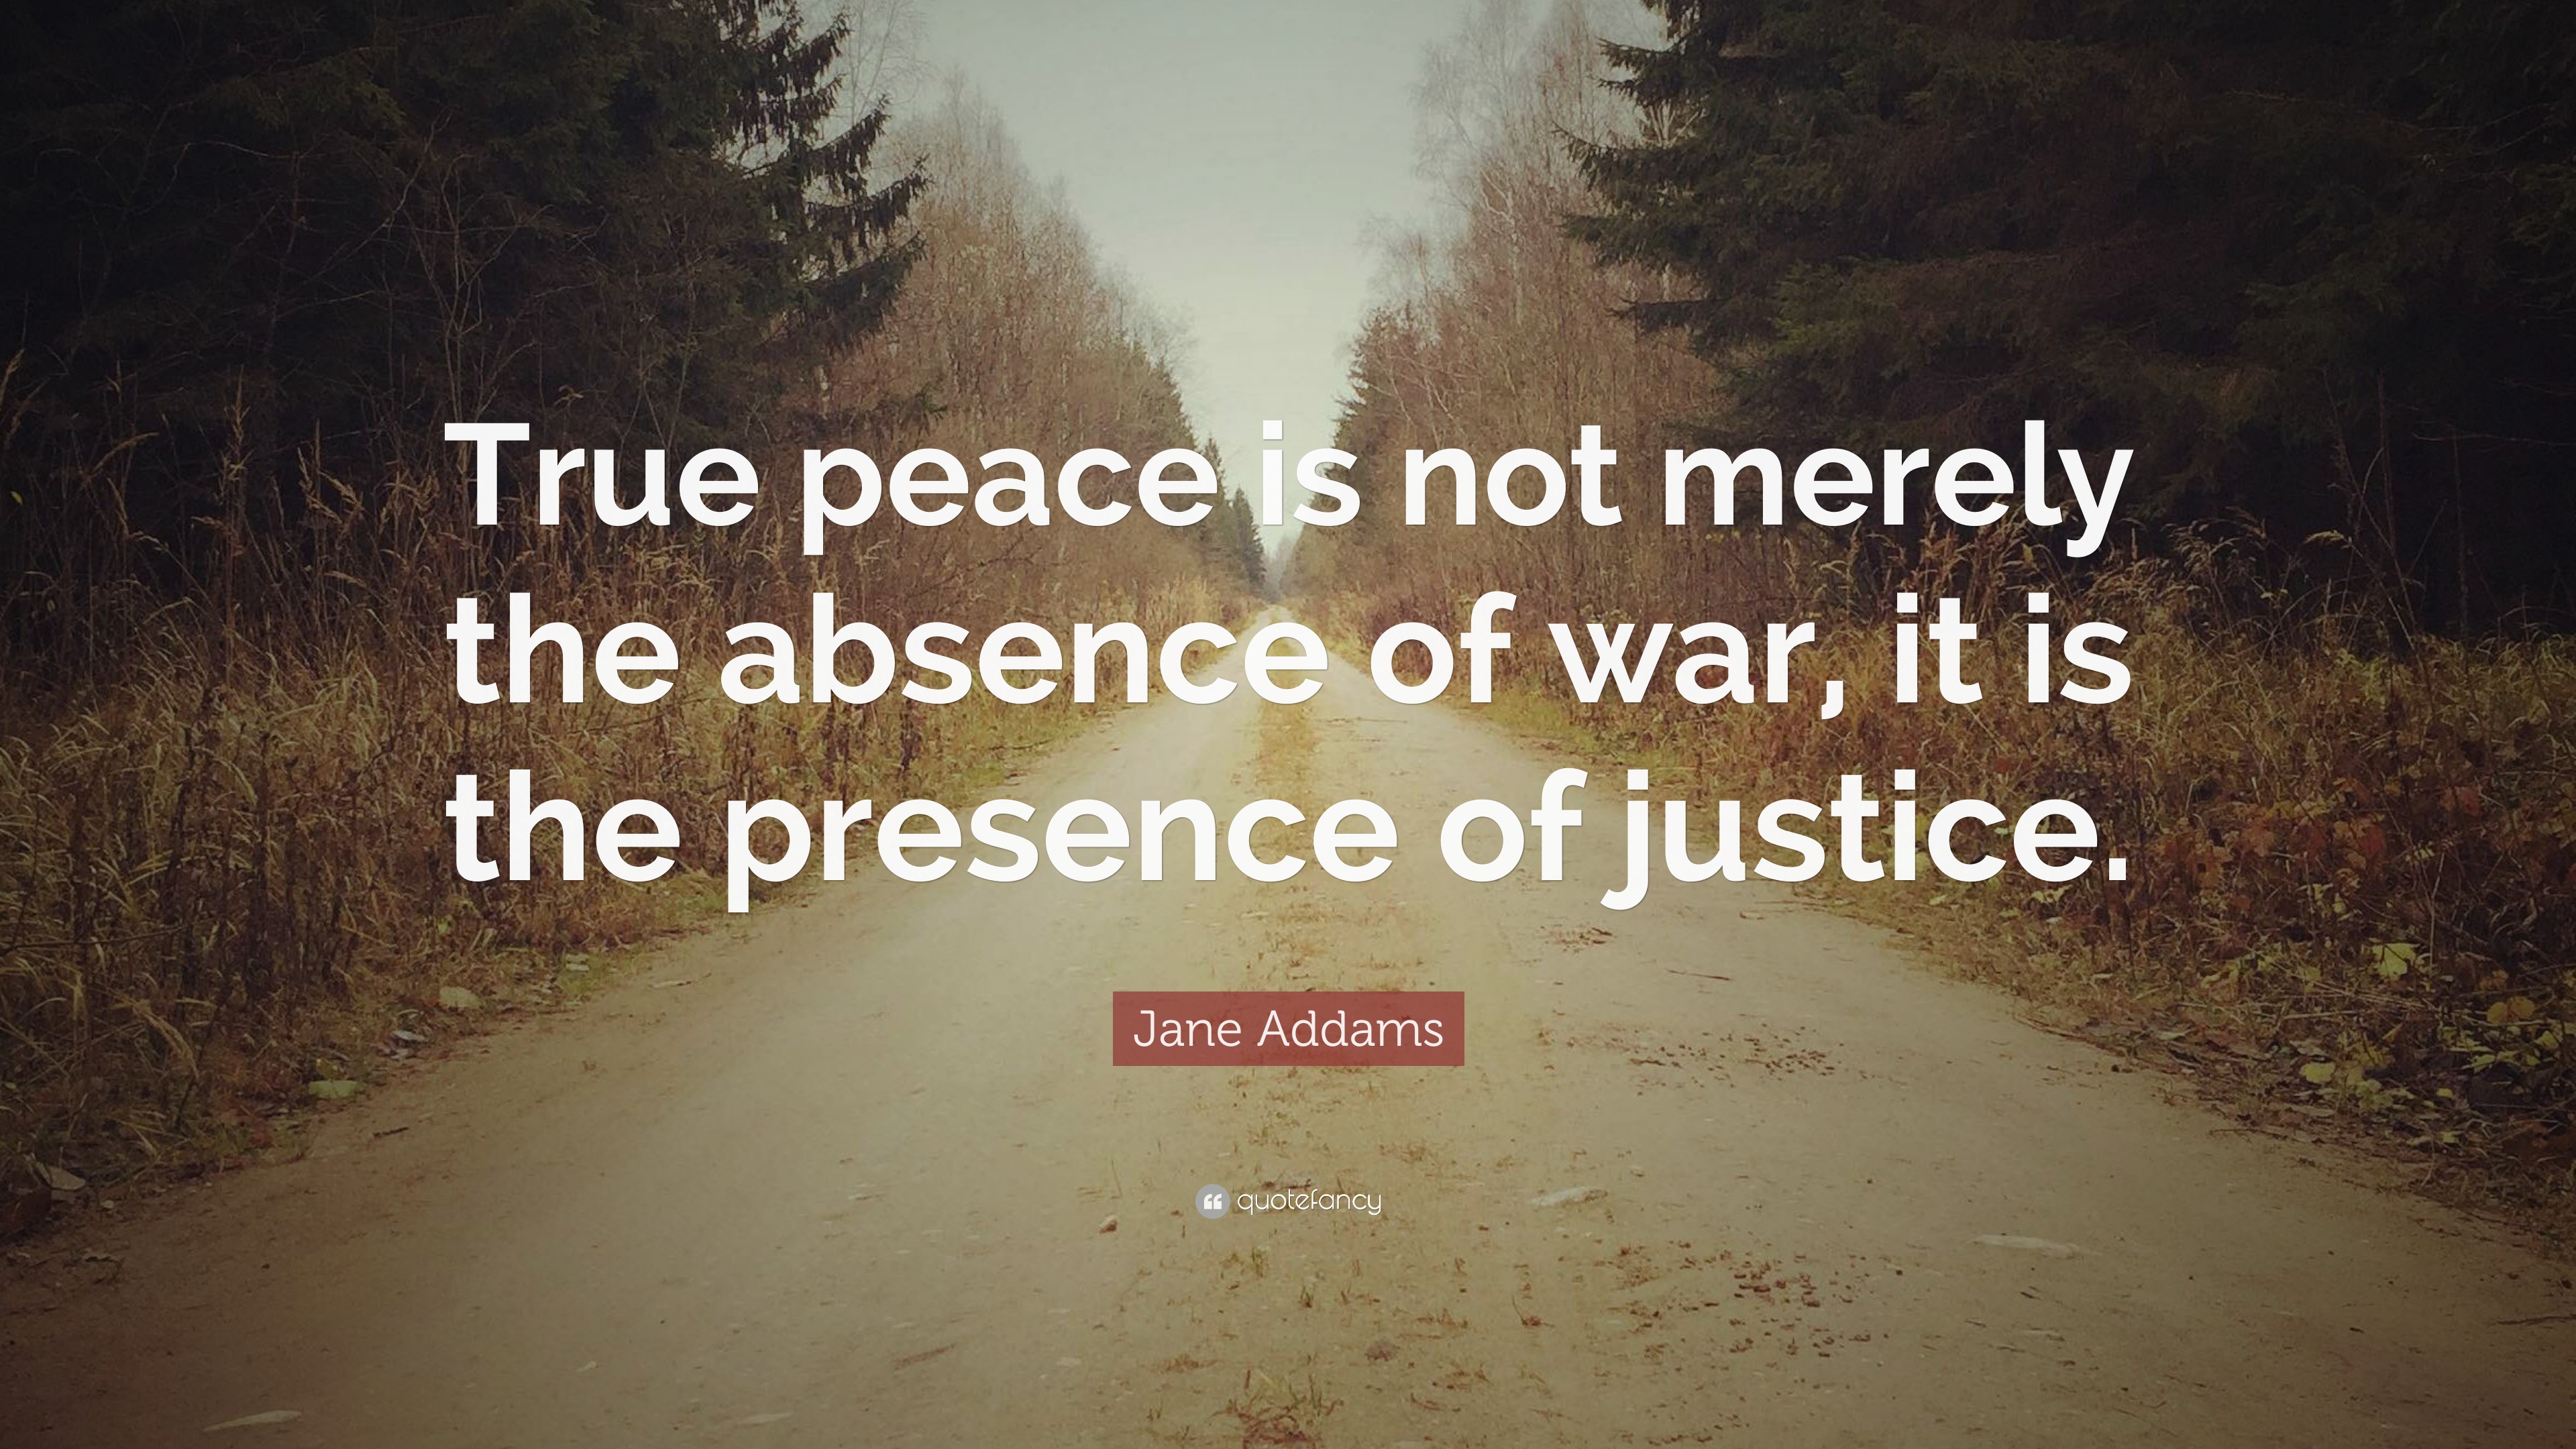 peace is not the absence of war essay